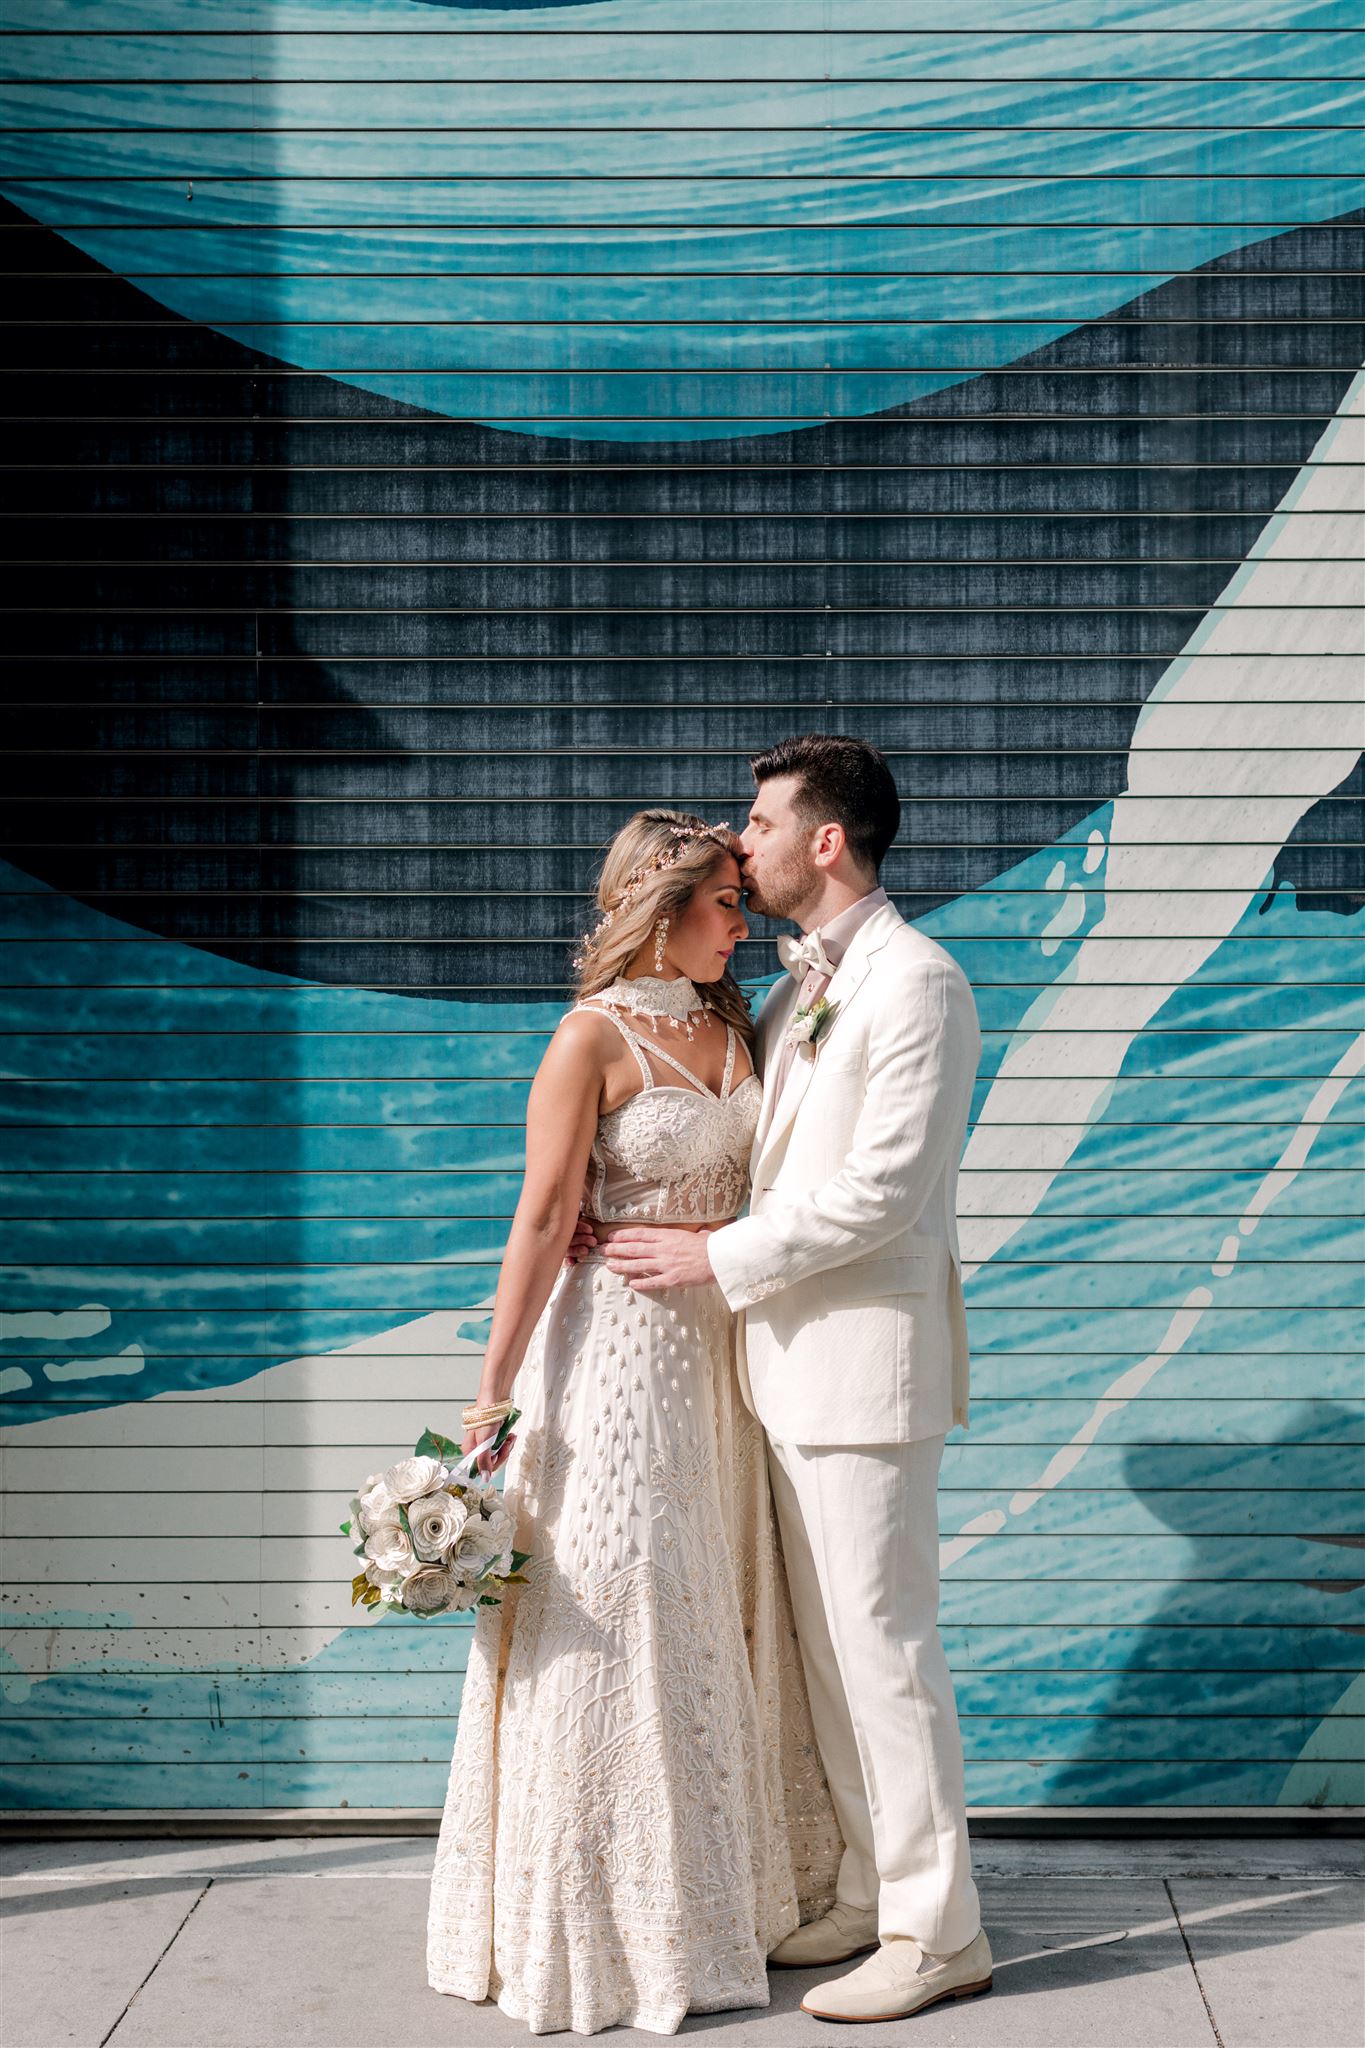 Bride and groom in white embracing in front of a colorful mural in New York City on their wedding day